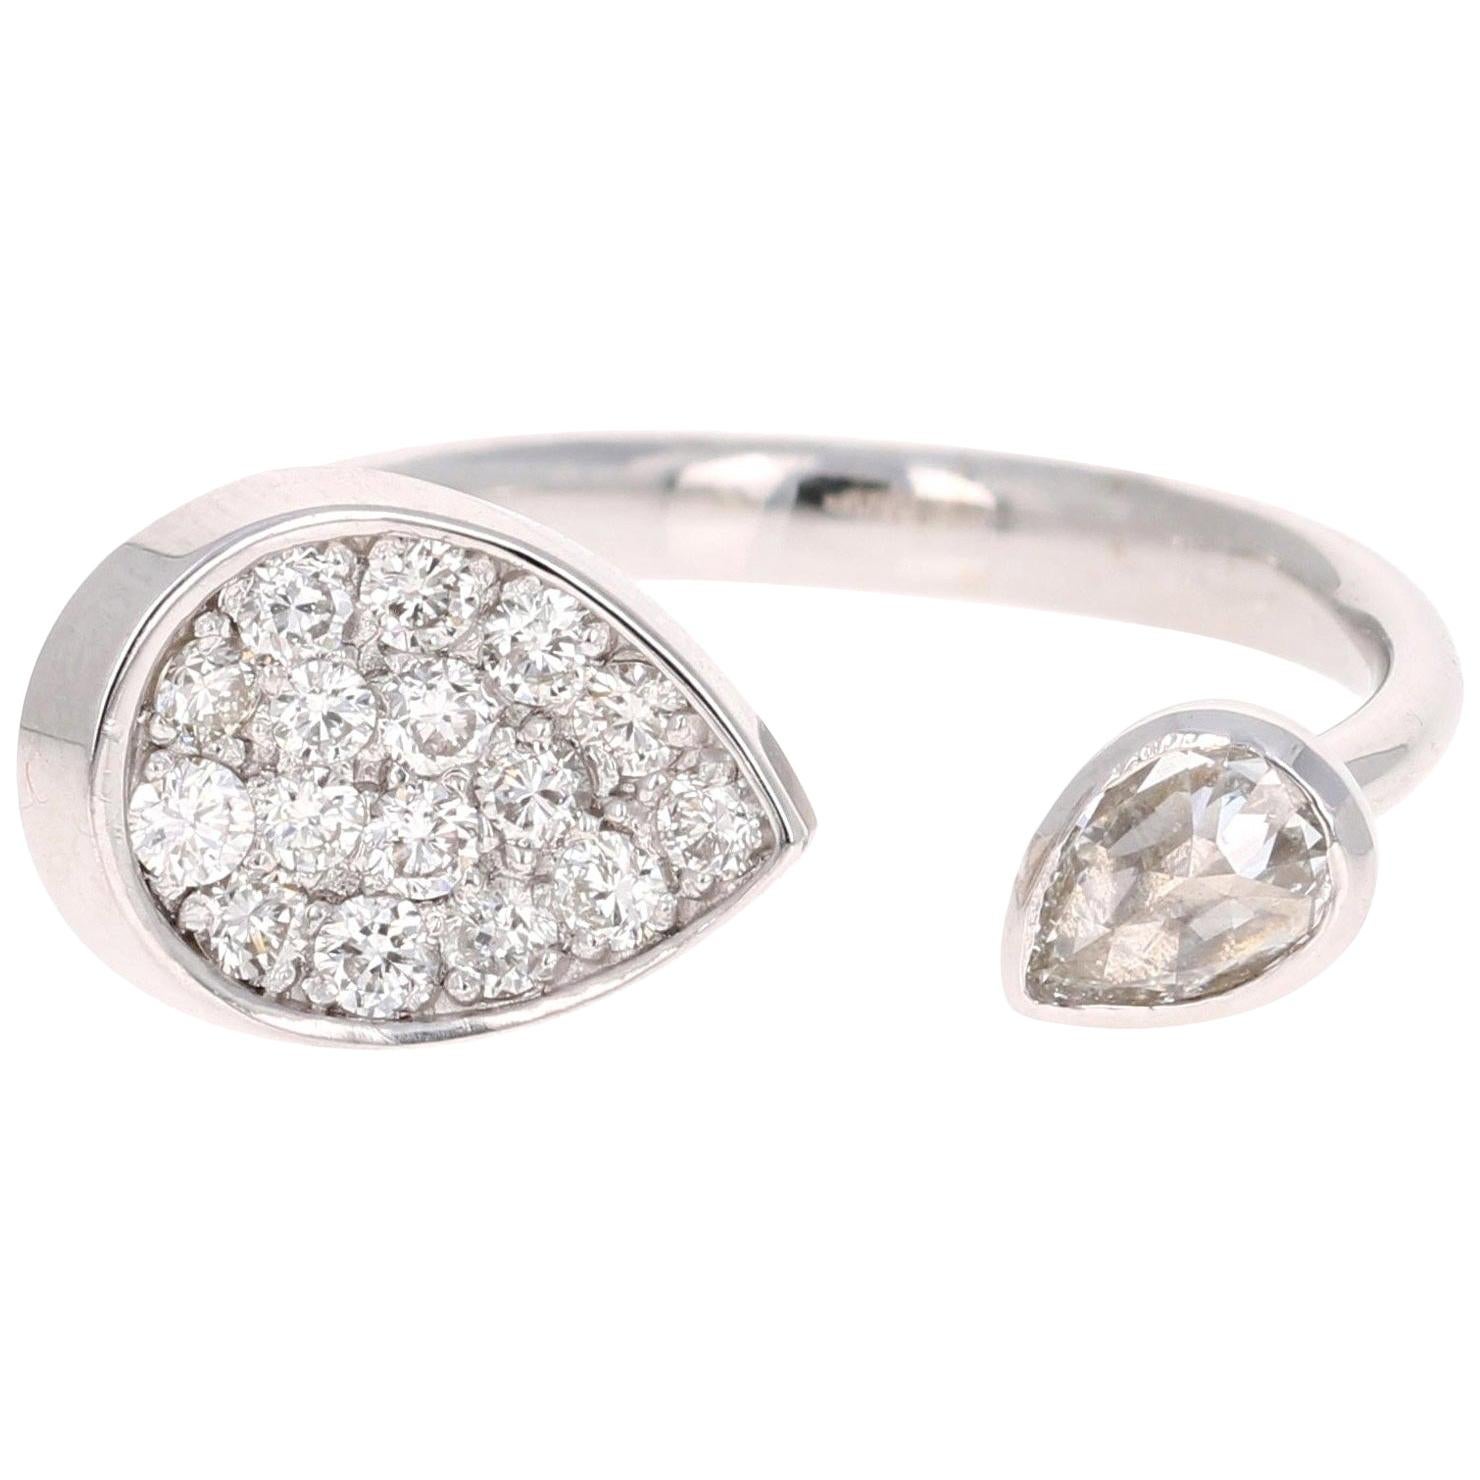 0.61 Carat Pear and Round Cut Diamond White Gold Cocktail Ring